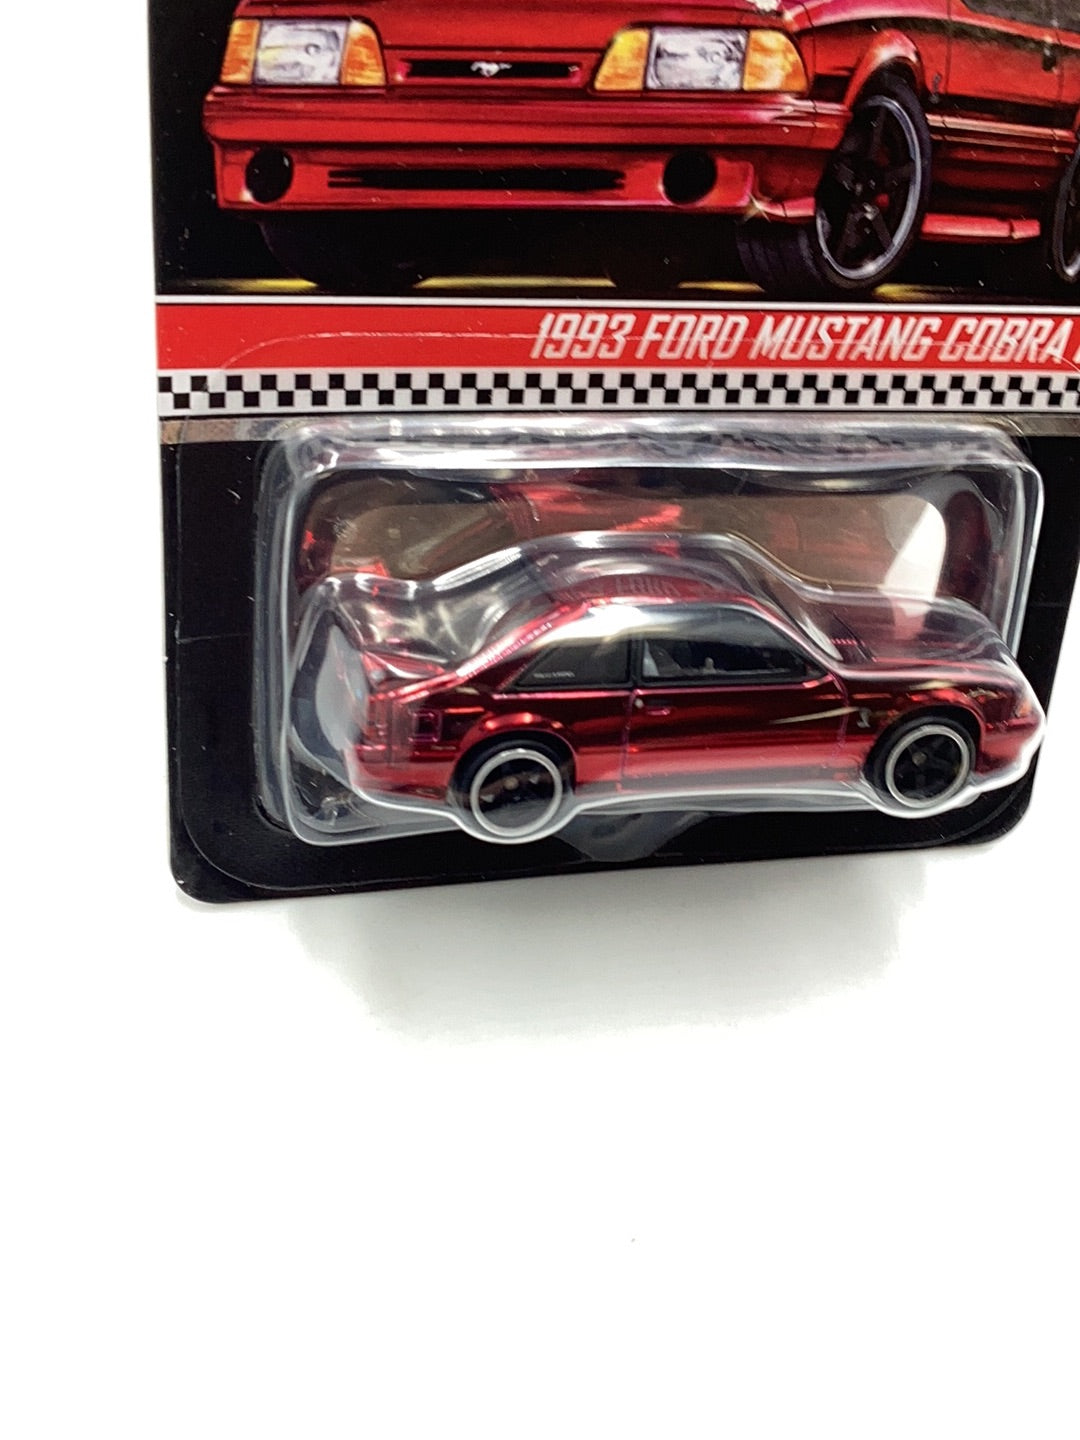 Hot wheels redline club 1993 Ford Mustang Cobra R with protector